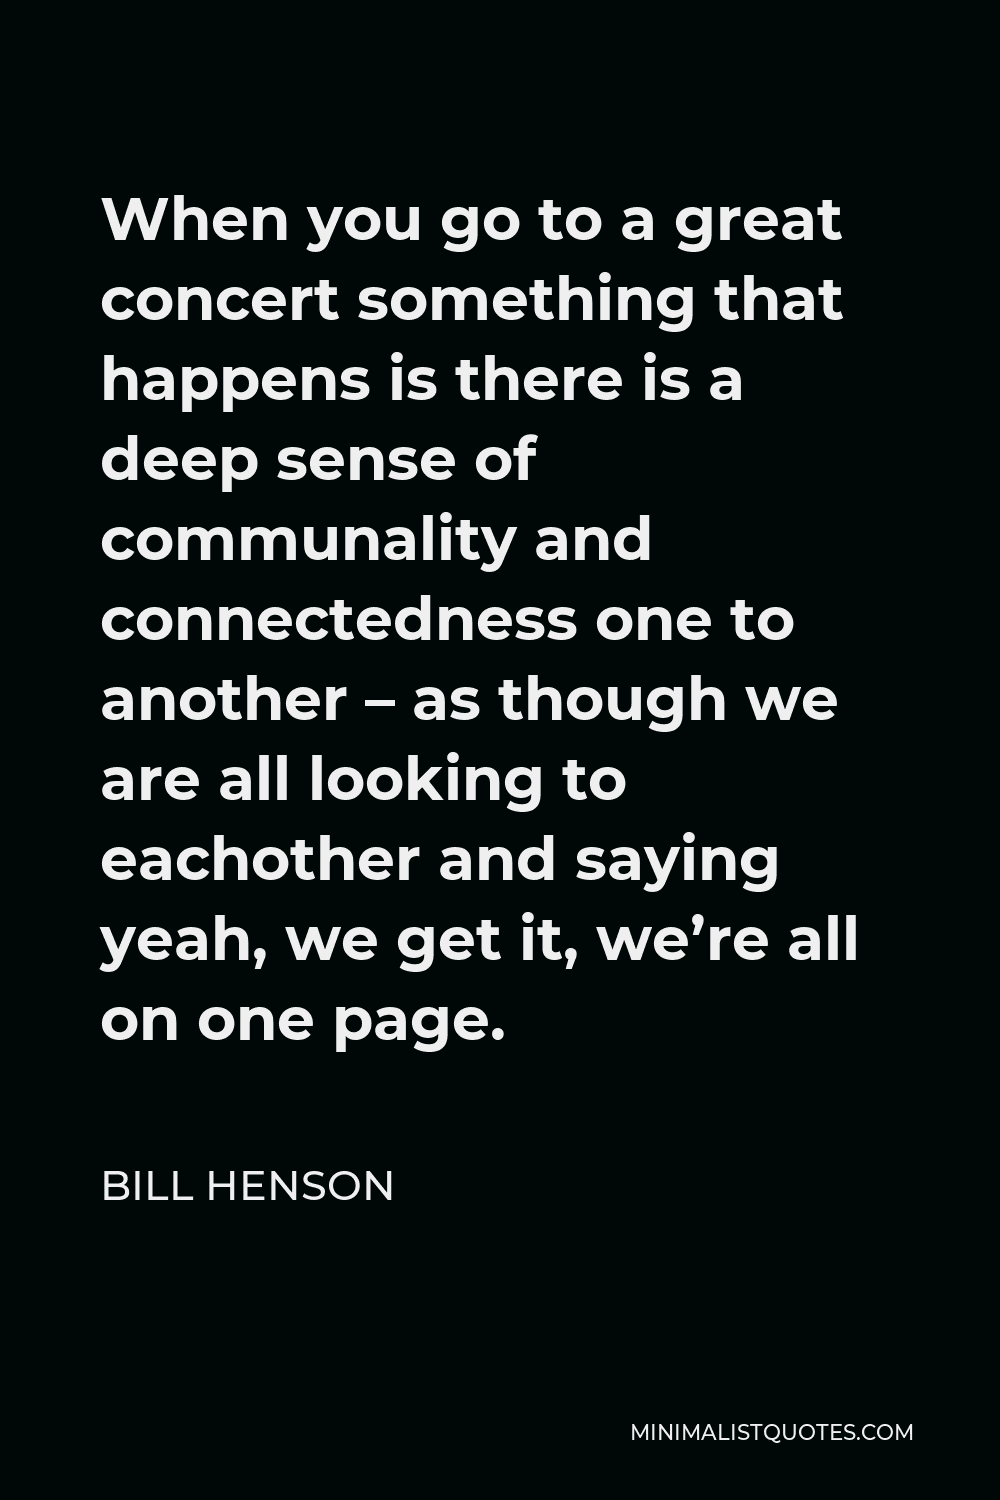 Bill Henson Quote - When you go to a great concert something that happens is there is a deep sense of communality and connectedness one to another – as though we are all looking to eachother and saying yeah, we get it, we’re all on one page.